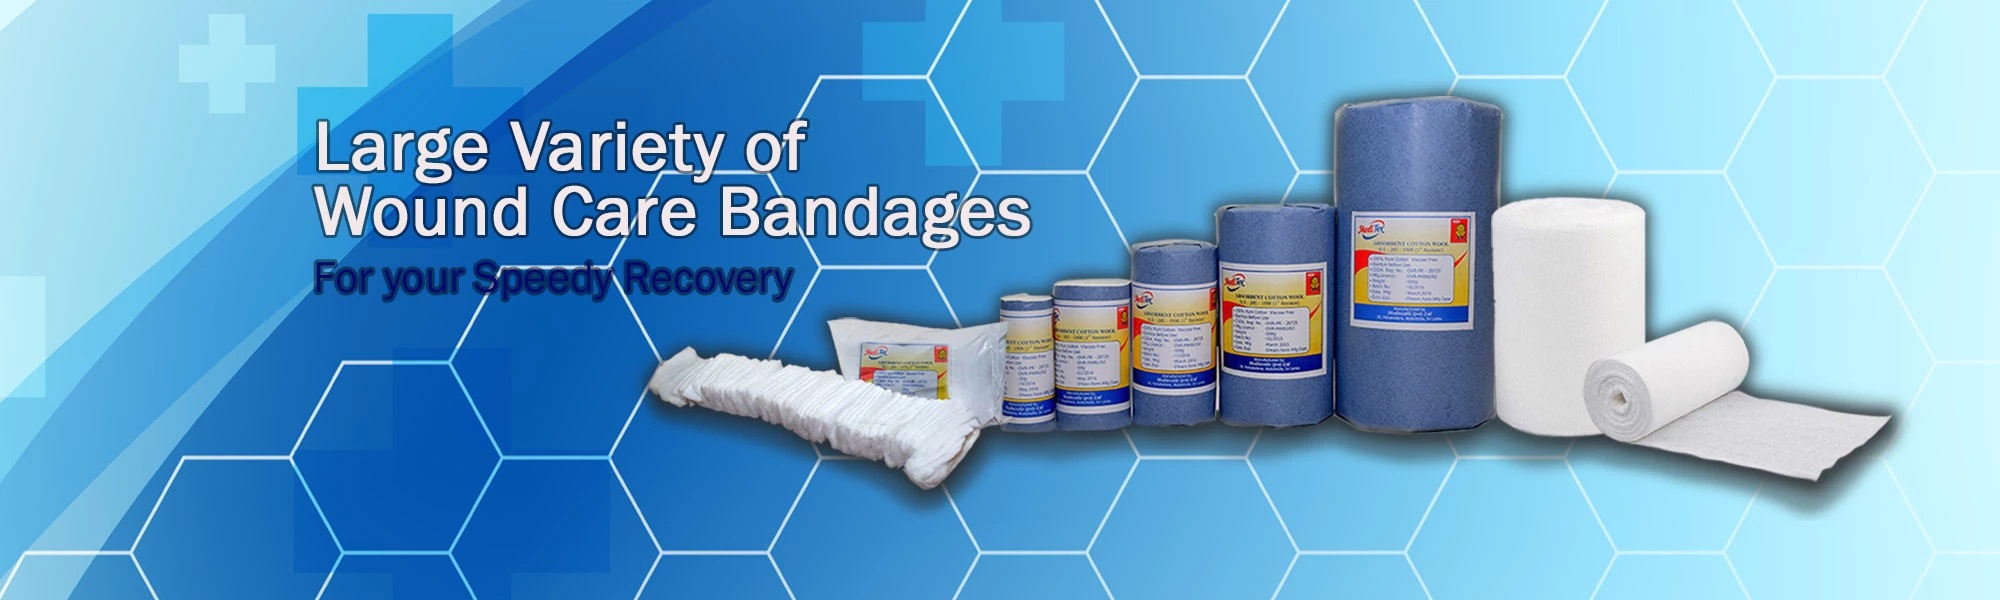 wound care bandages